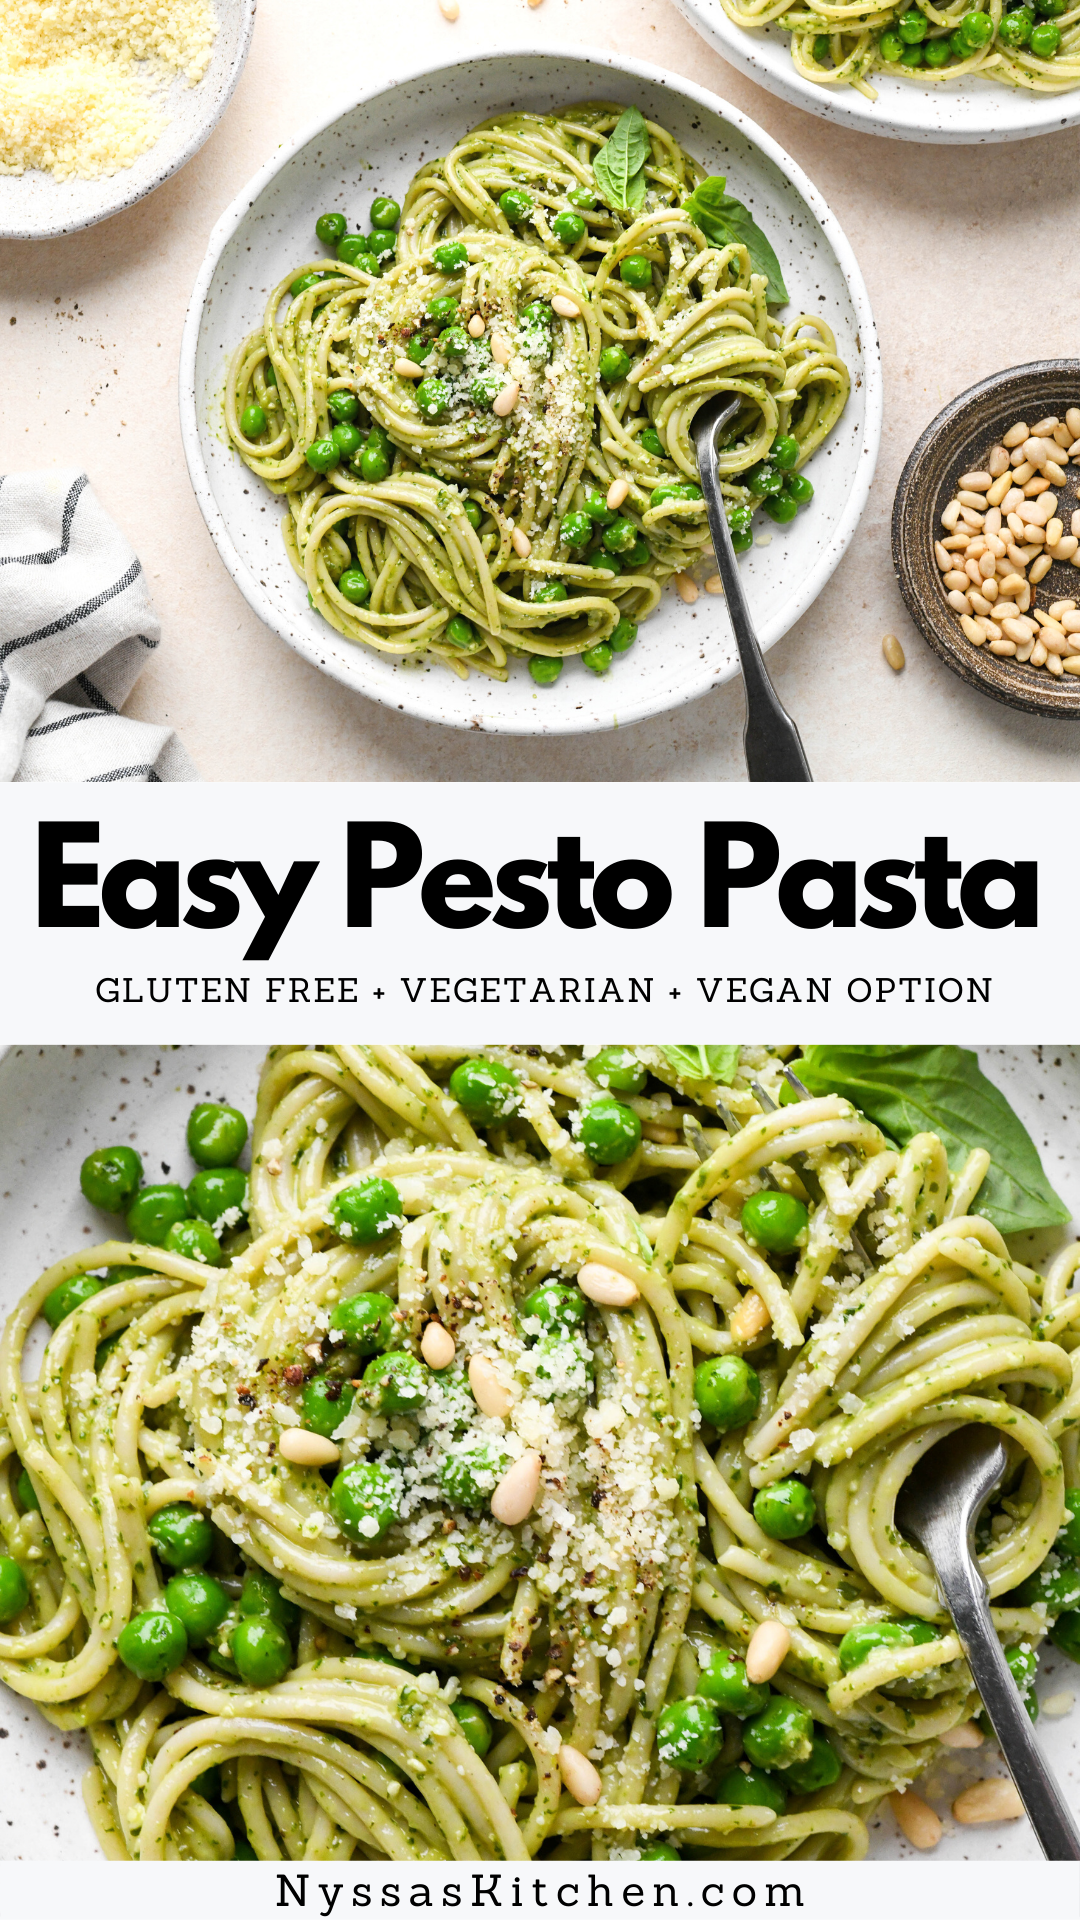 Easy pesto pasta is the perfect weeknight recipe! It's ready in less than 30 minutes and full of bold flavors. Option to make it dairy free / vegan, and customize it with whatever protein or veggies you like! Gluten free, vegetarian, vegan option.